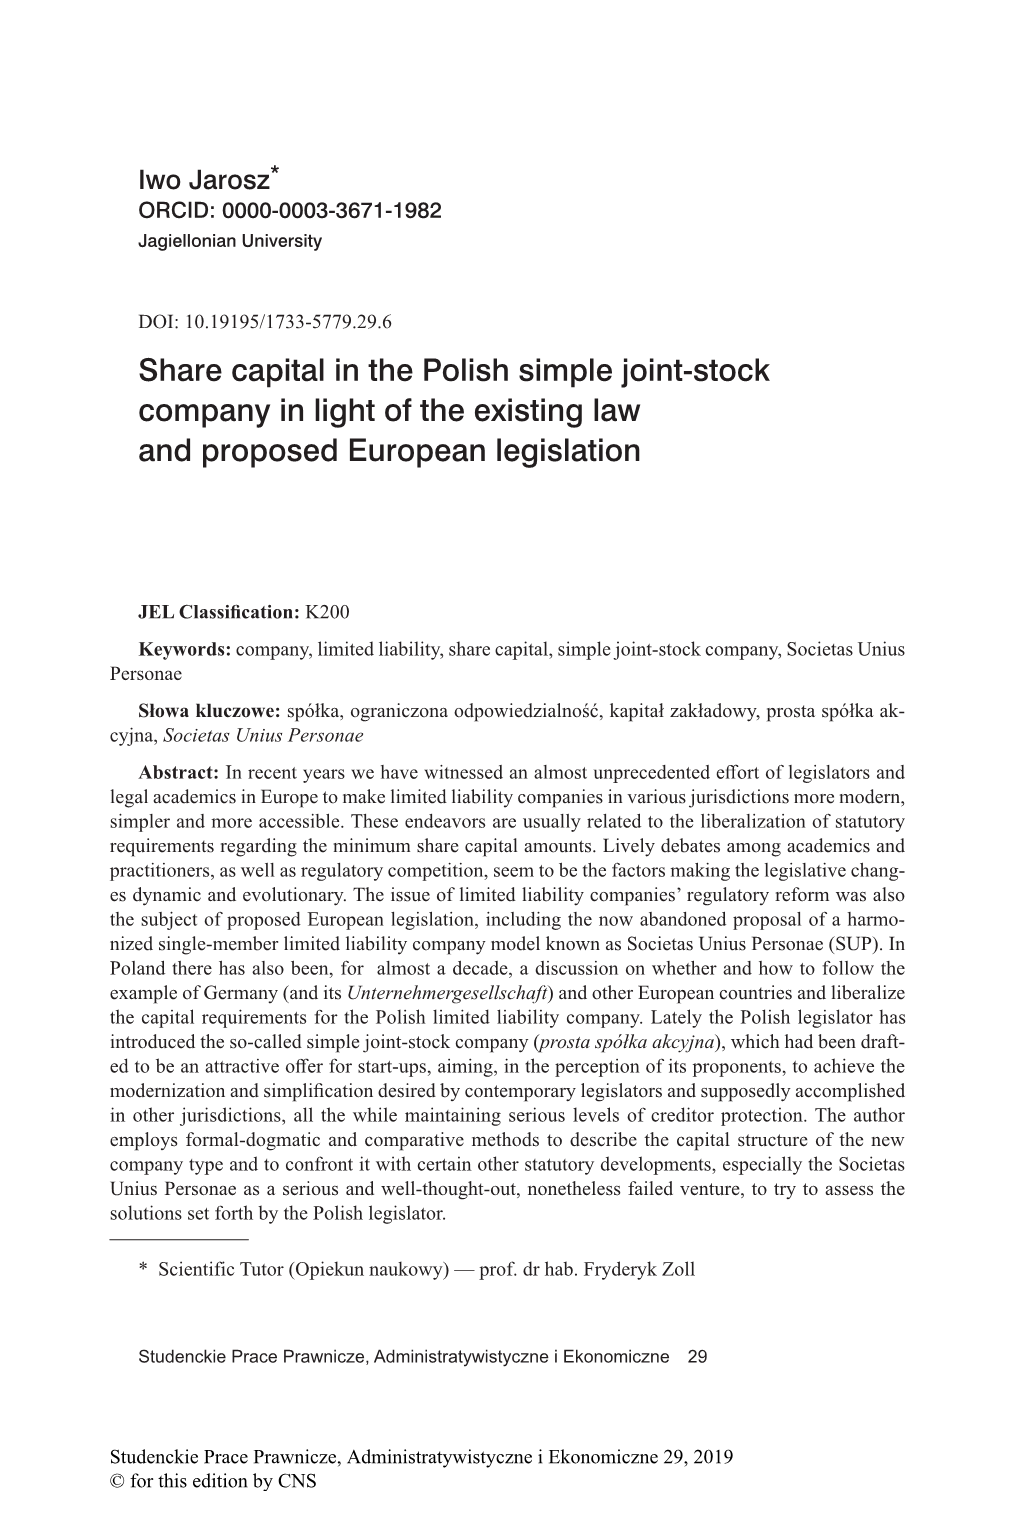 Share Capital in the Polish Simple Joint-Stock Company in Light of the Existing Law and Proposed European Legislation